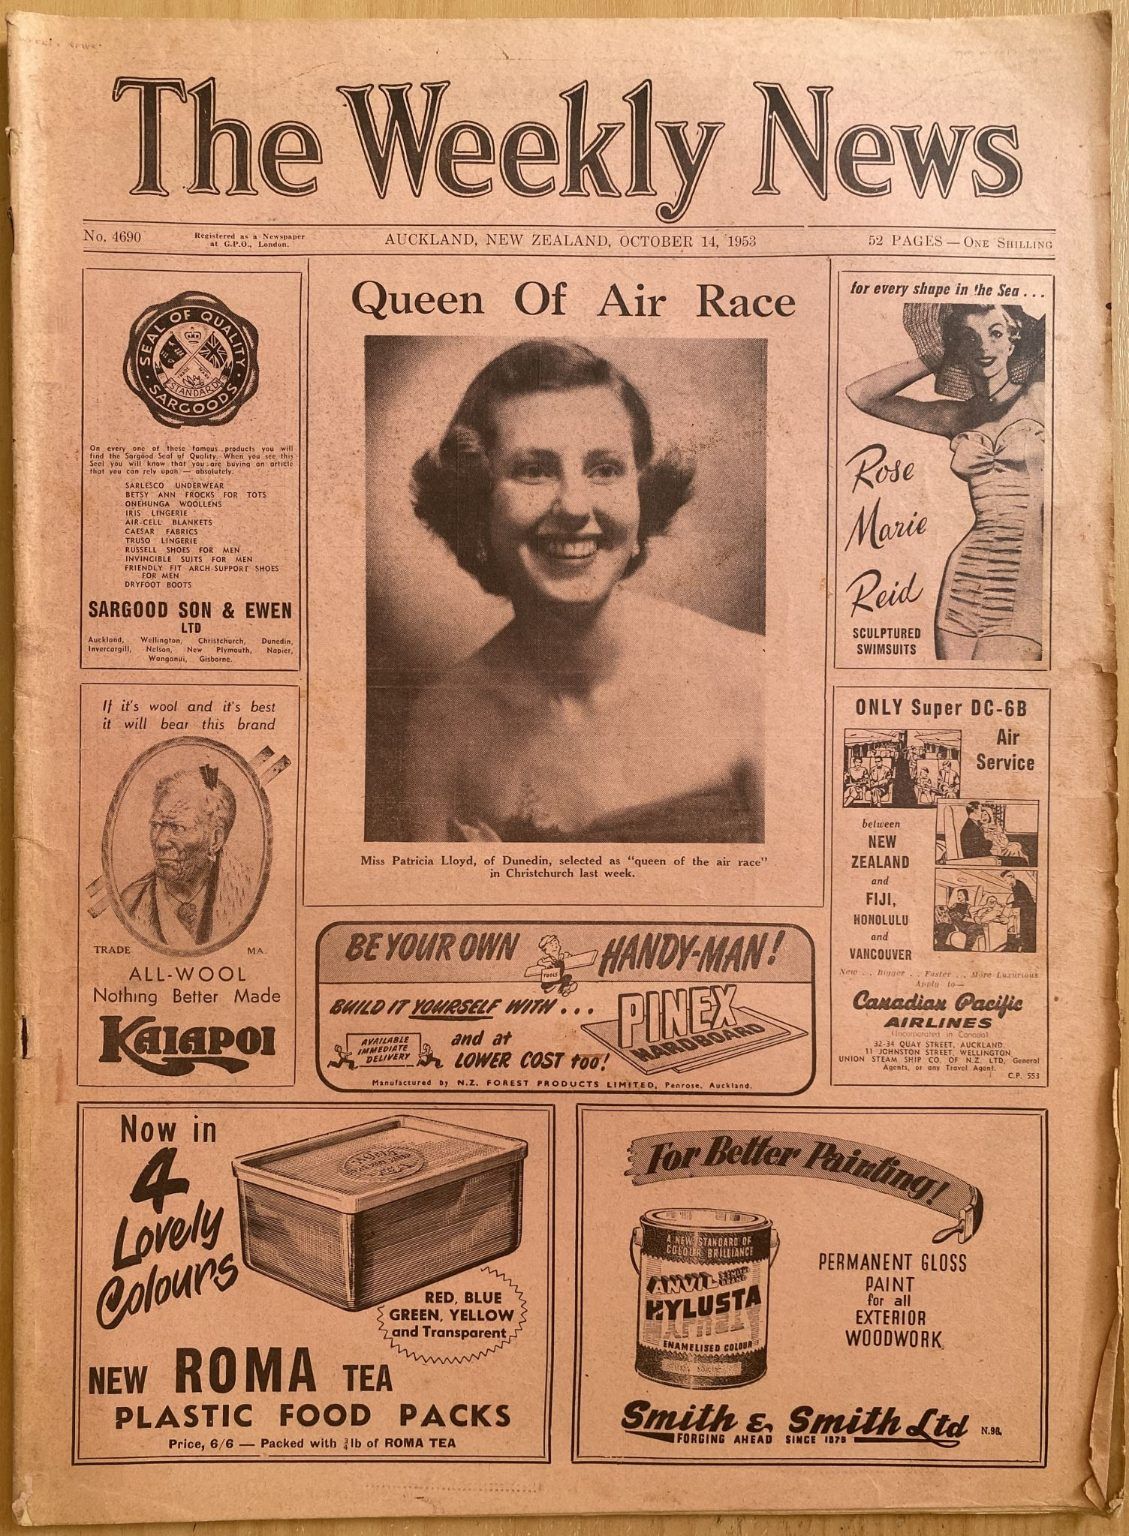 OLD NEWSPAPER: The Weekly News - No. 4690, 14 October 1953